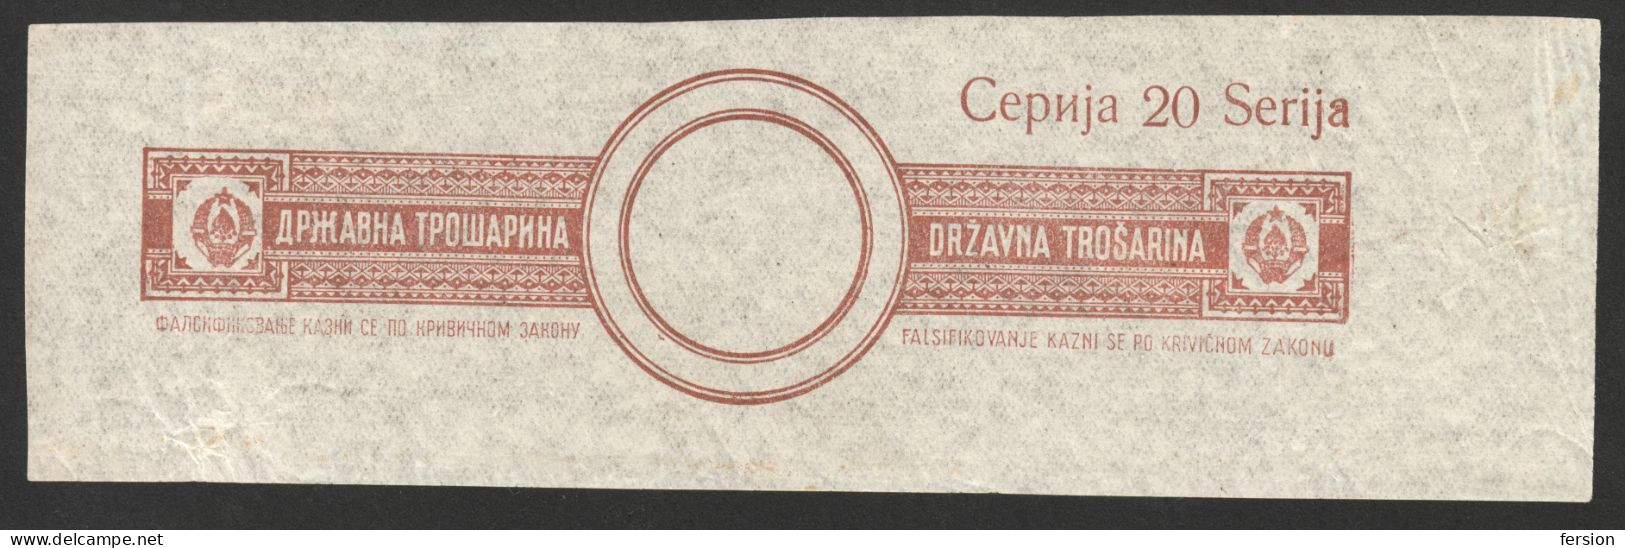 Yugoslavia 1945 EXCISE Revenue Fiscal Luxury Tax CONTROL BAND Stamp / Stripe Seal - Ser. No. 20 - Coat Of Arms - Dienstmarken